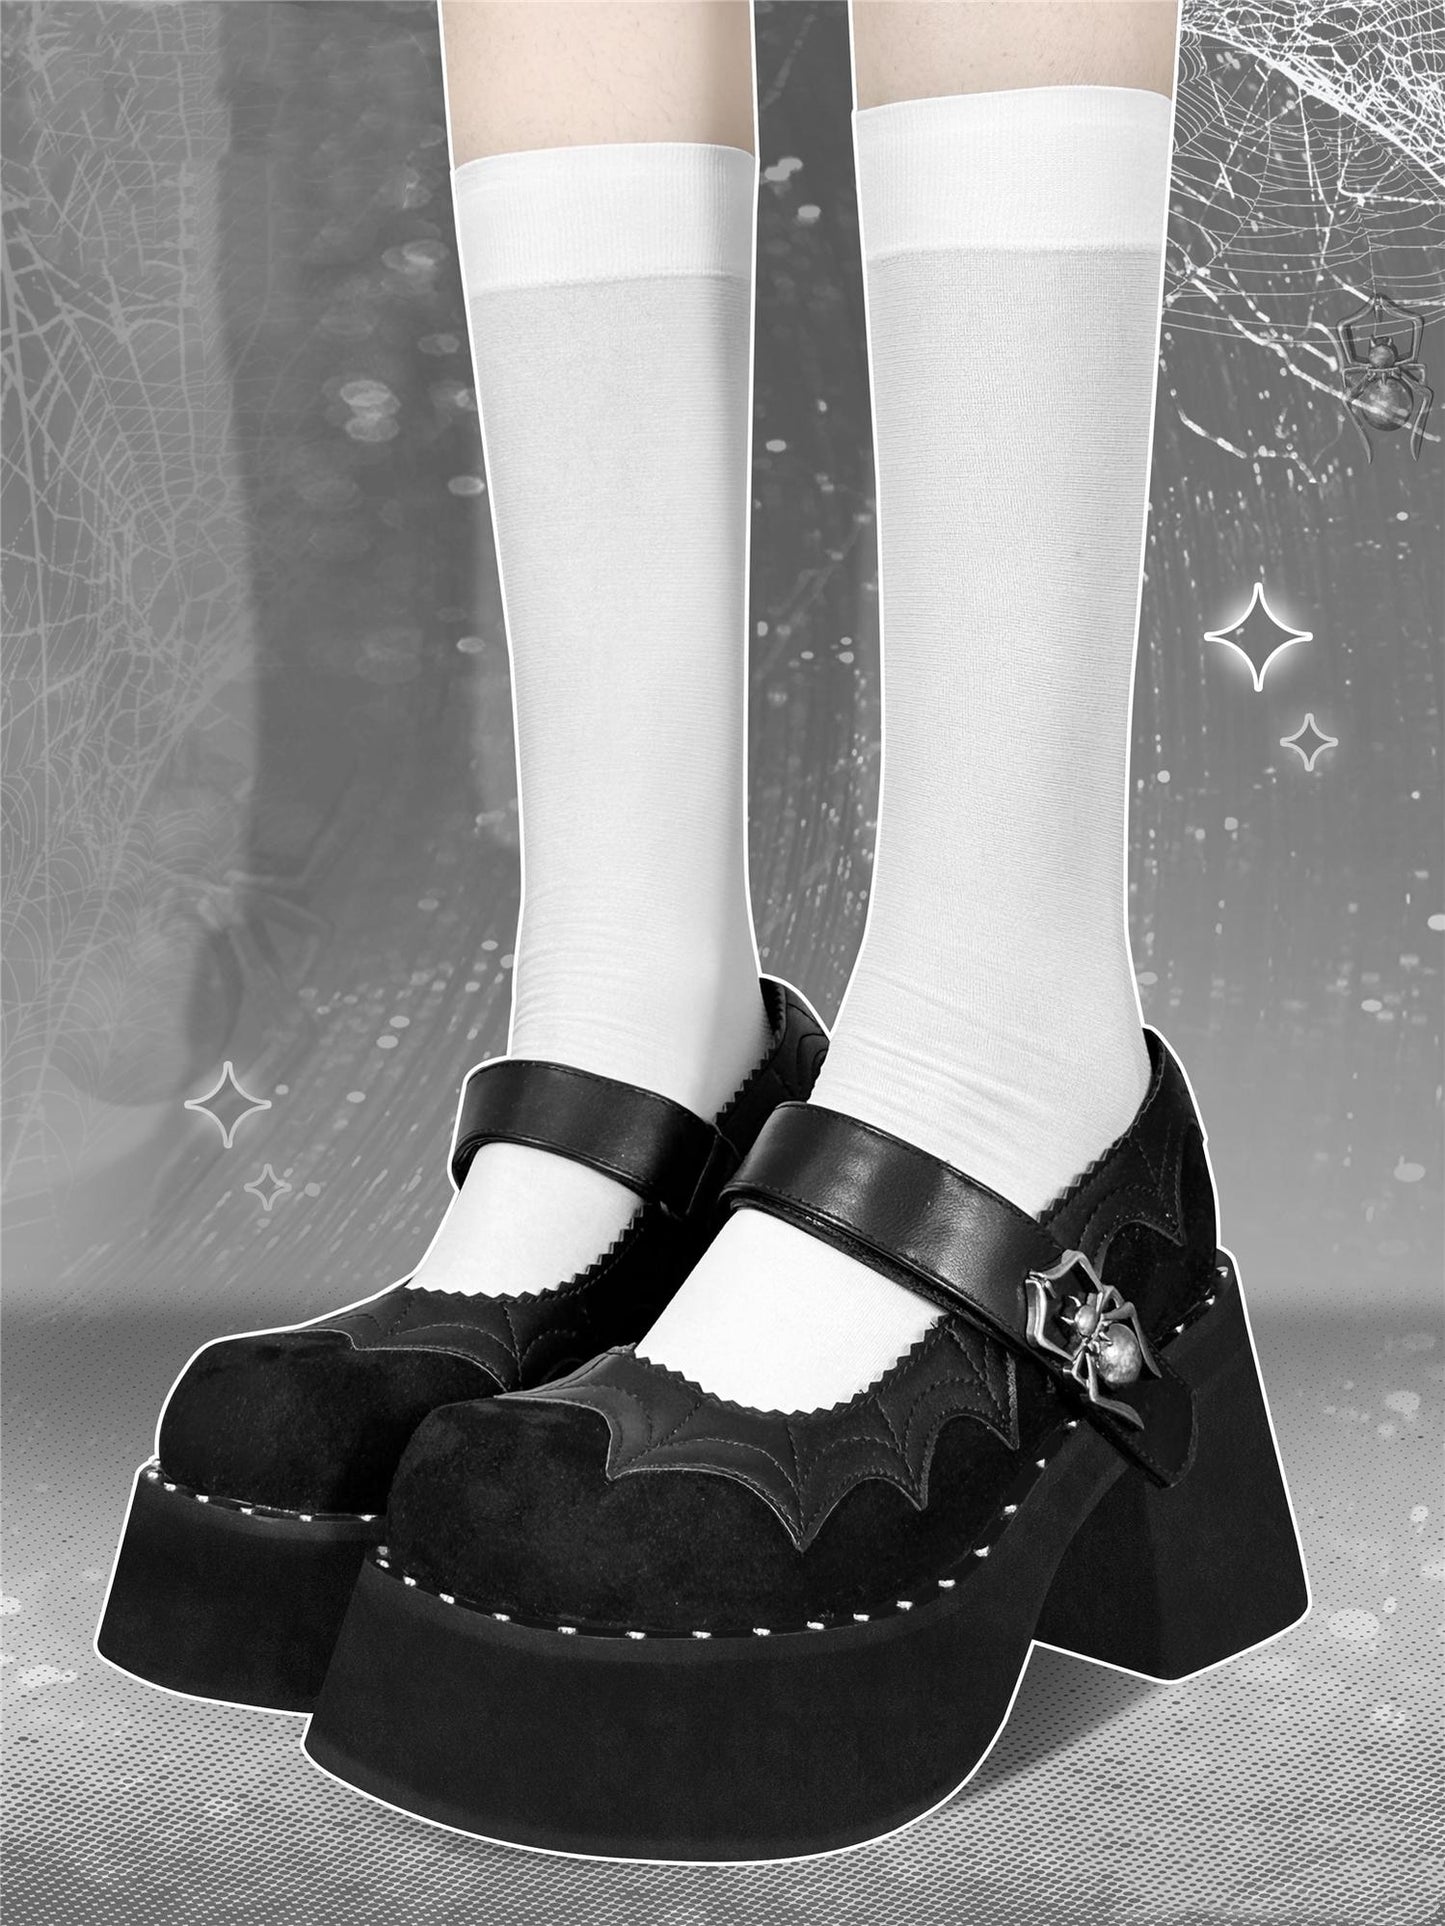 Gothic Shoes Black High Heel Thick-soled Shoes (34 35 36 37 38 39 40) 34396:469000